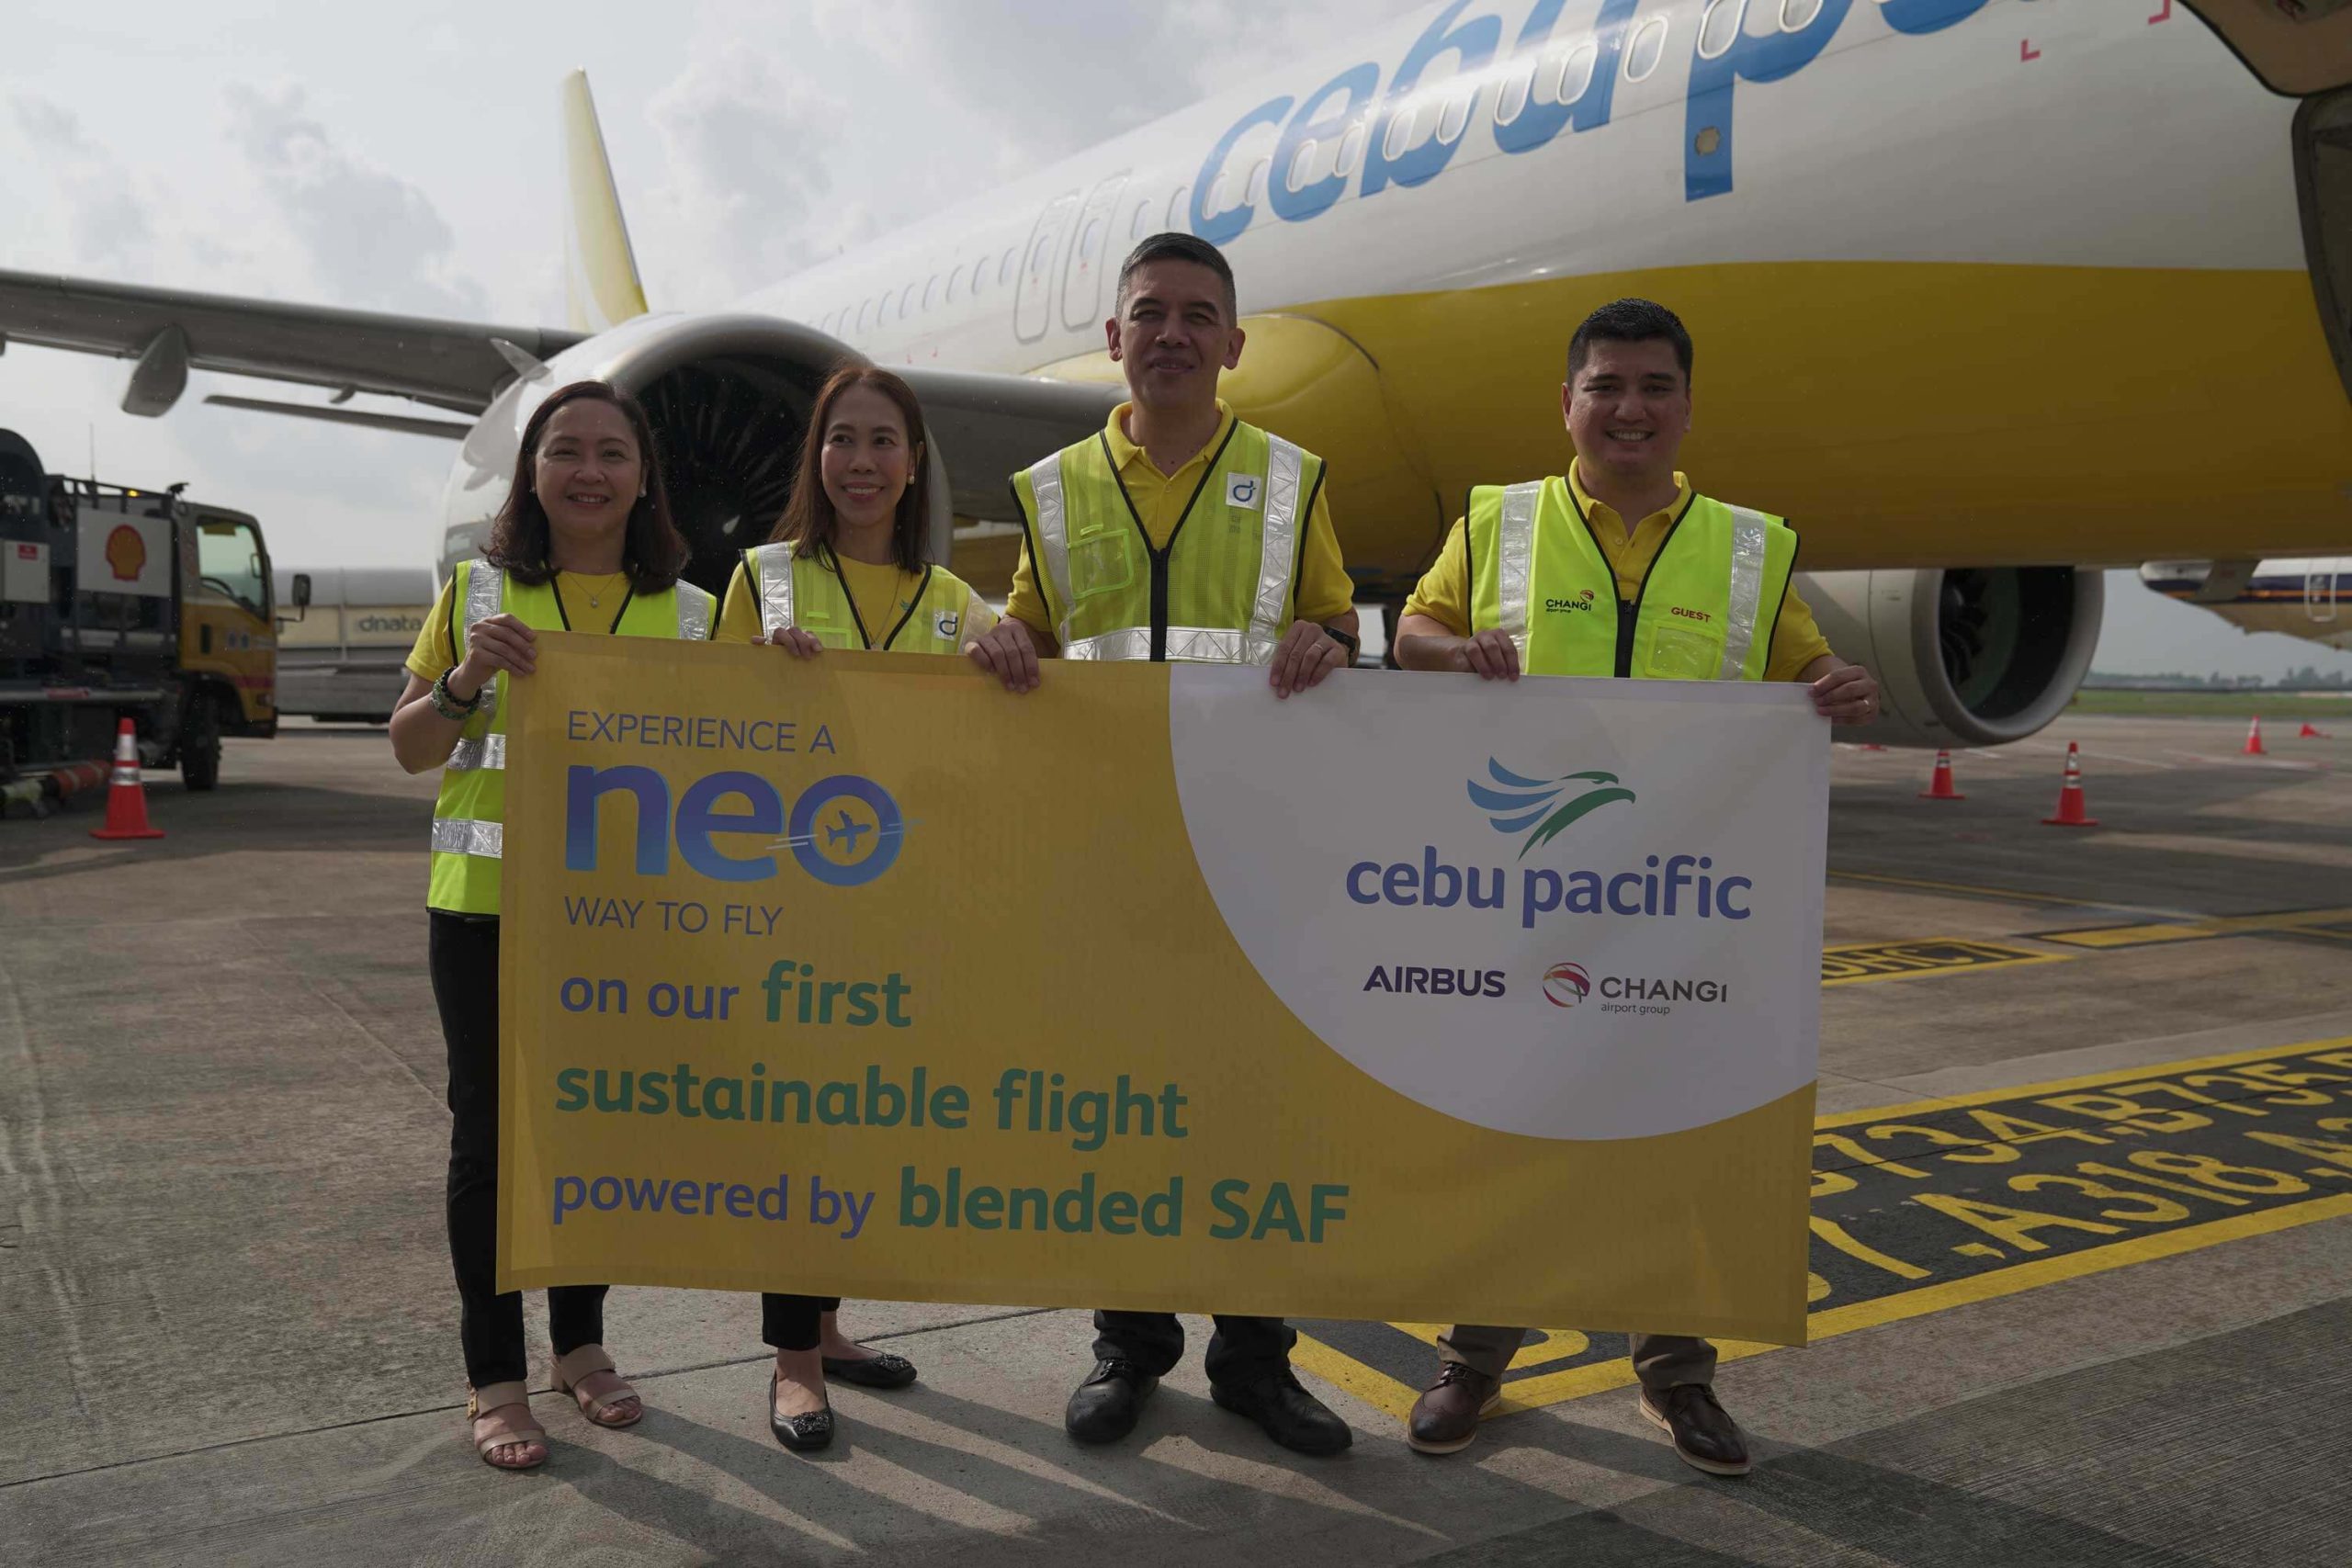 Cebu Pacific’s first sustainable flight powered by blended SAF at Changi Airport (from left) Nanette Mailum, Director, Corporate Strategy, CEB; Carmina Romero, Director, Corporate Communications, CEB; Alex Reyes, Chief Strategy Officer, CEB; Dio Angelo Alojado, Director, New Business Development, CEB.